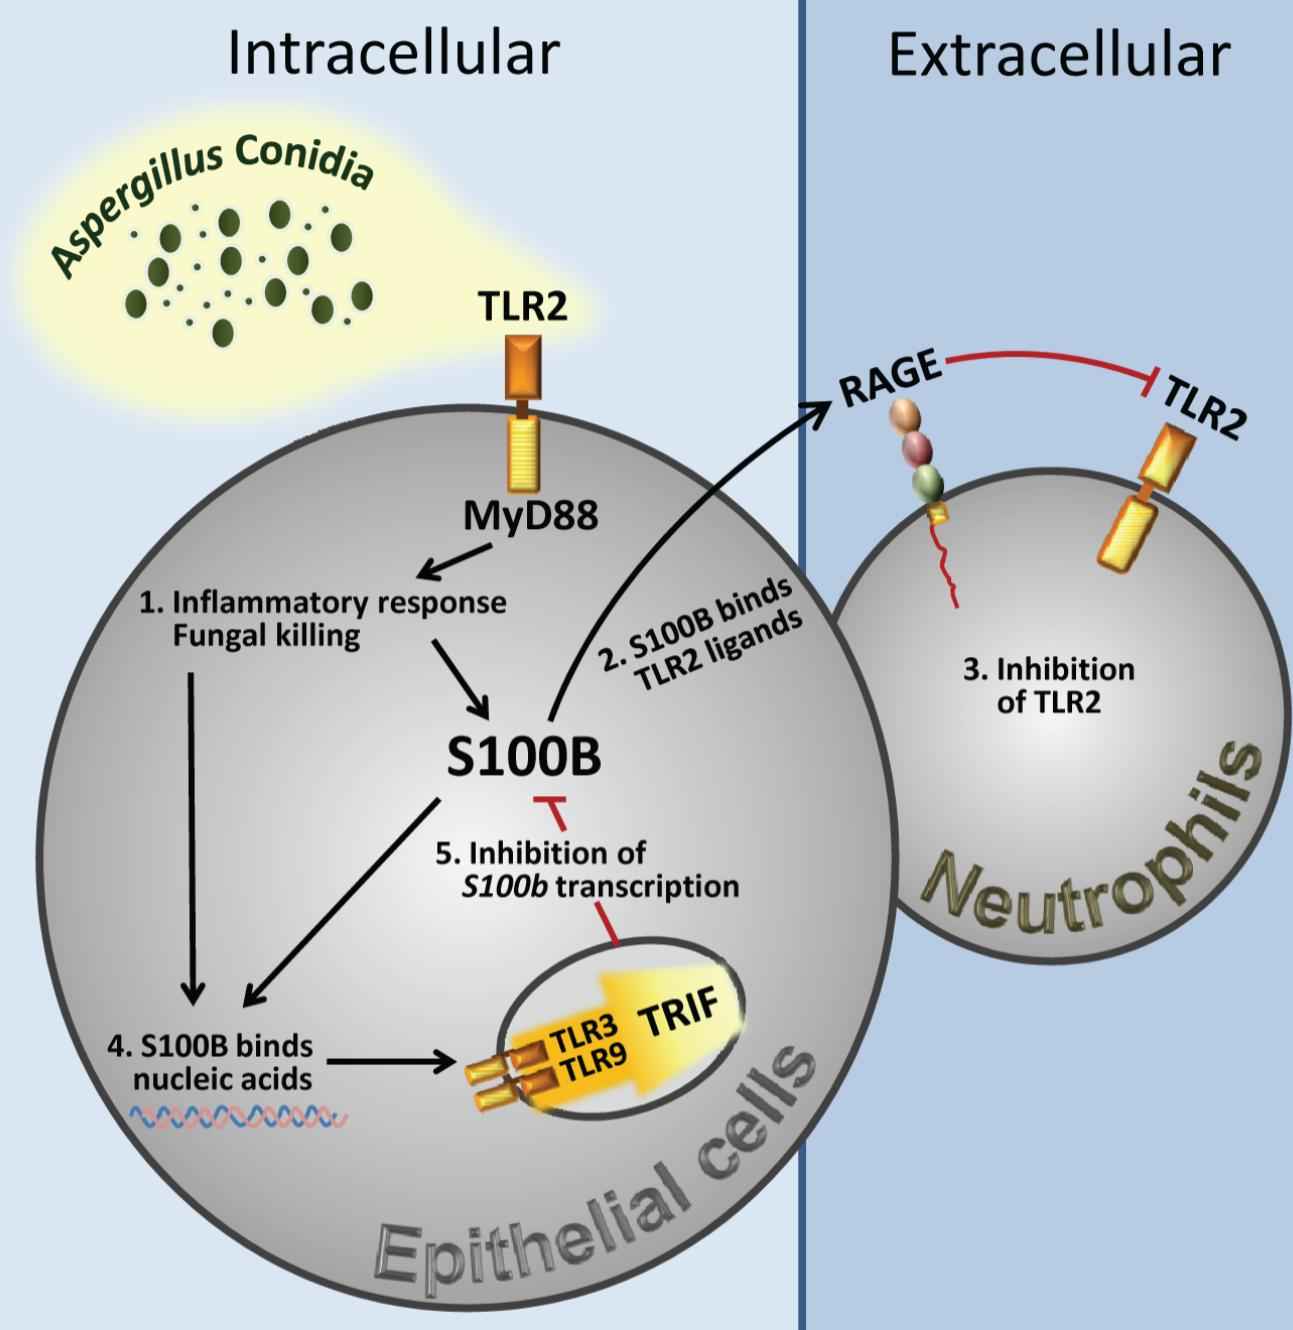 Figure 1. Spatiotemporal integration of signals from TLRs and RAGE by S100B limits pathogen– and danger–induced inflammation. (Sorci G, et al., 2011)